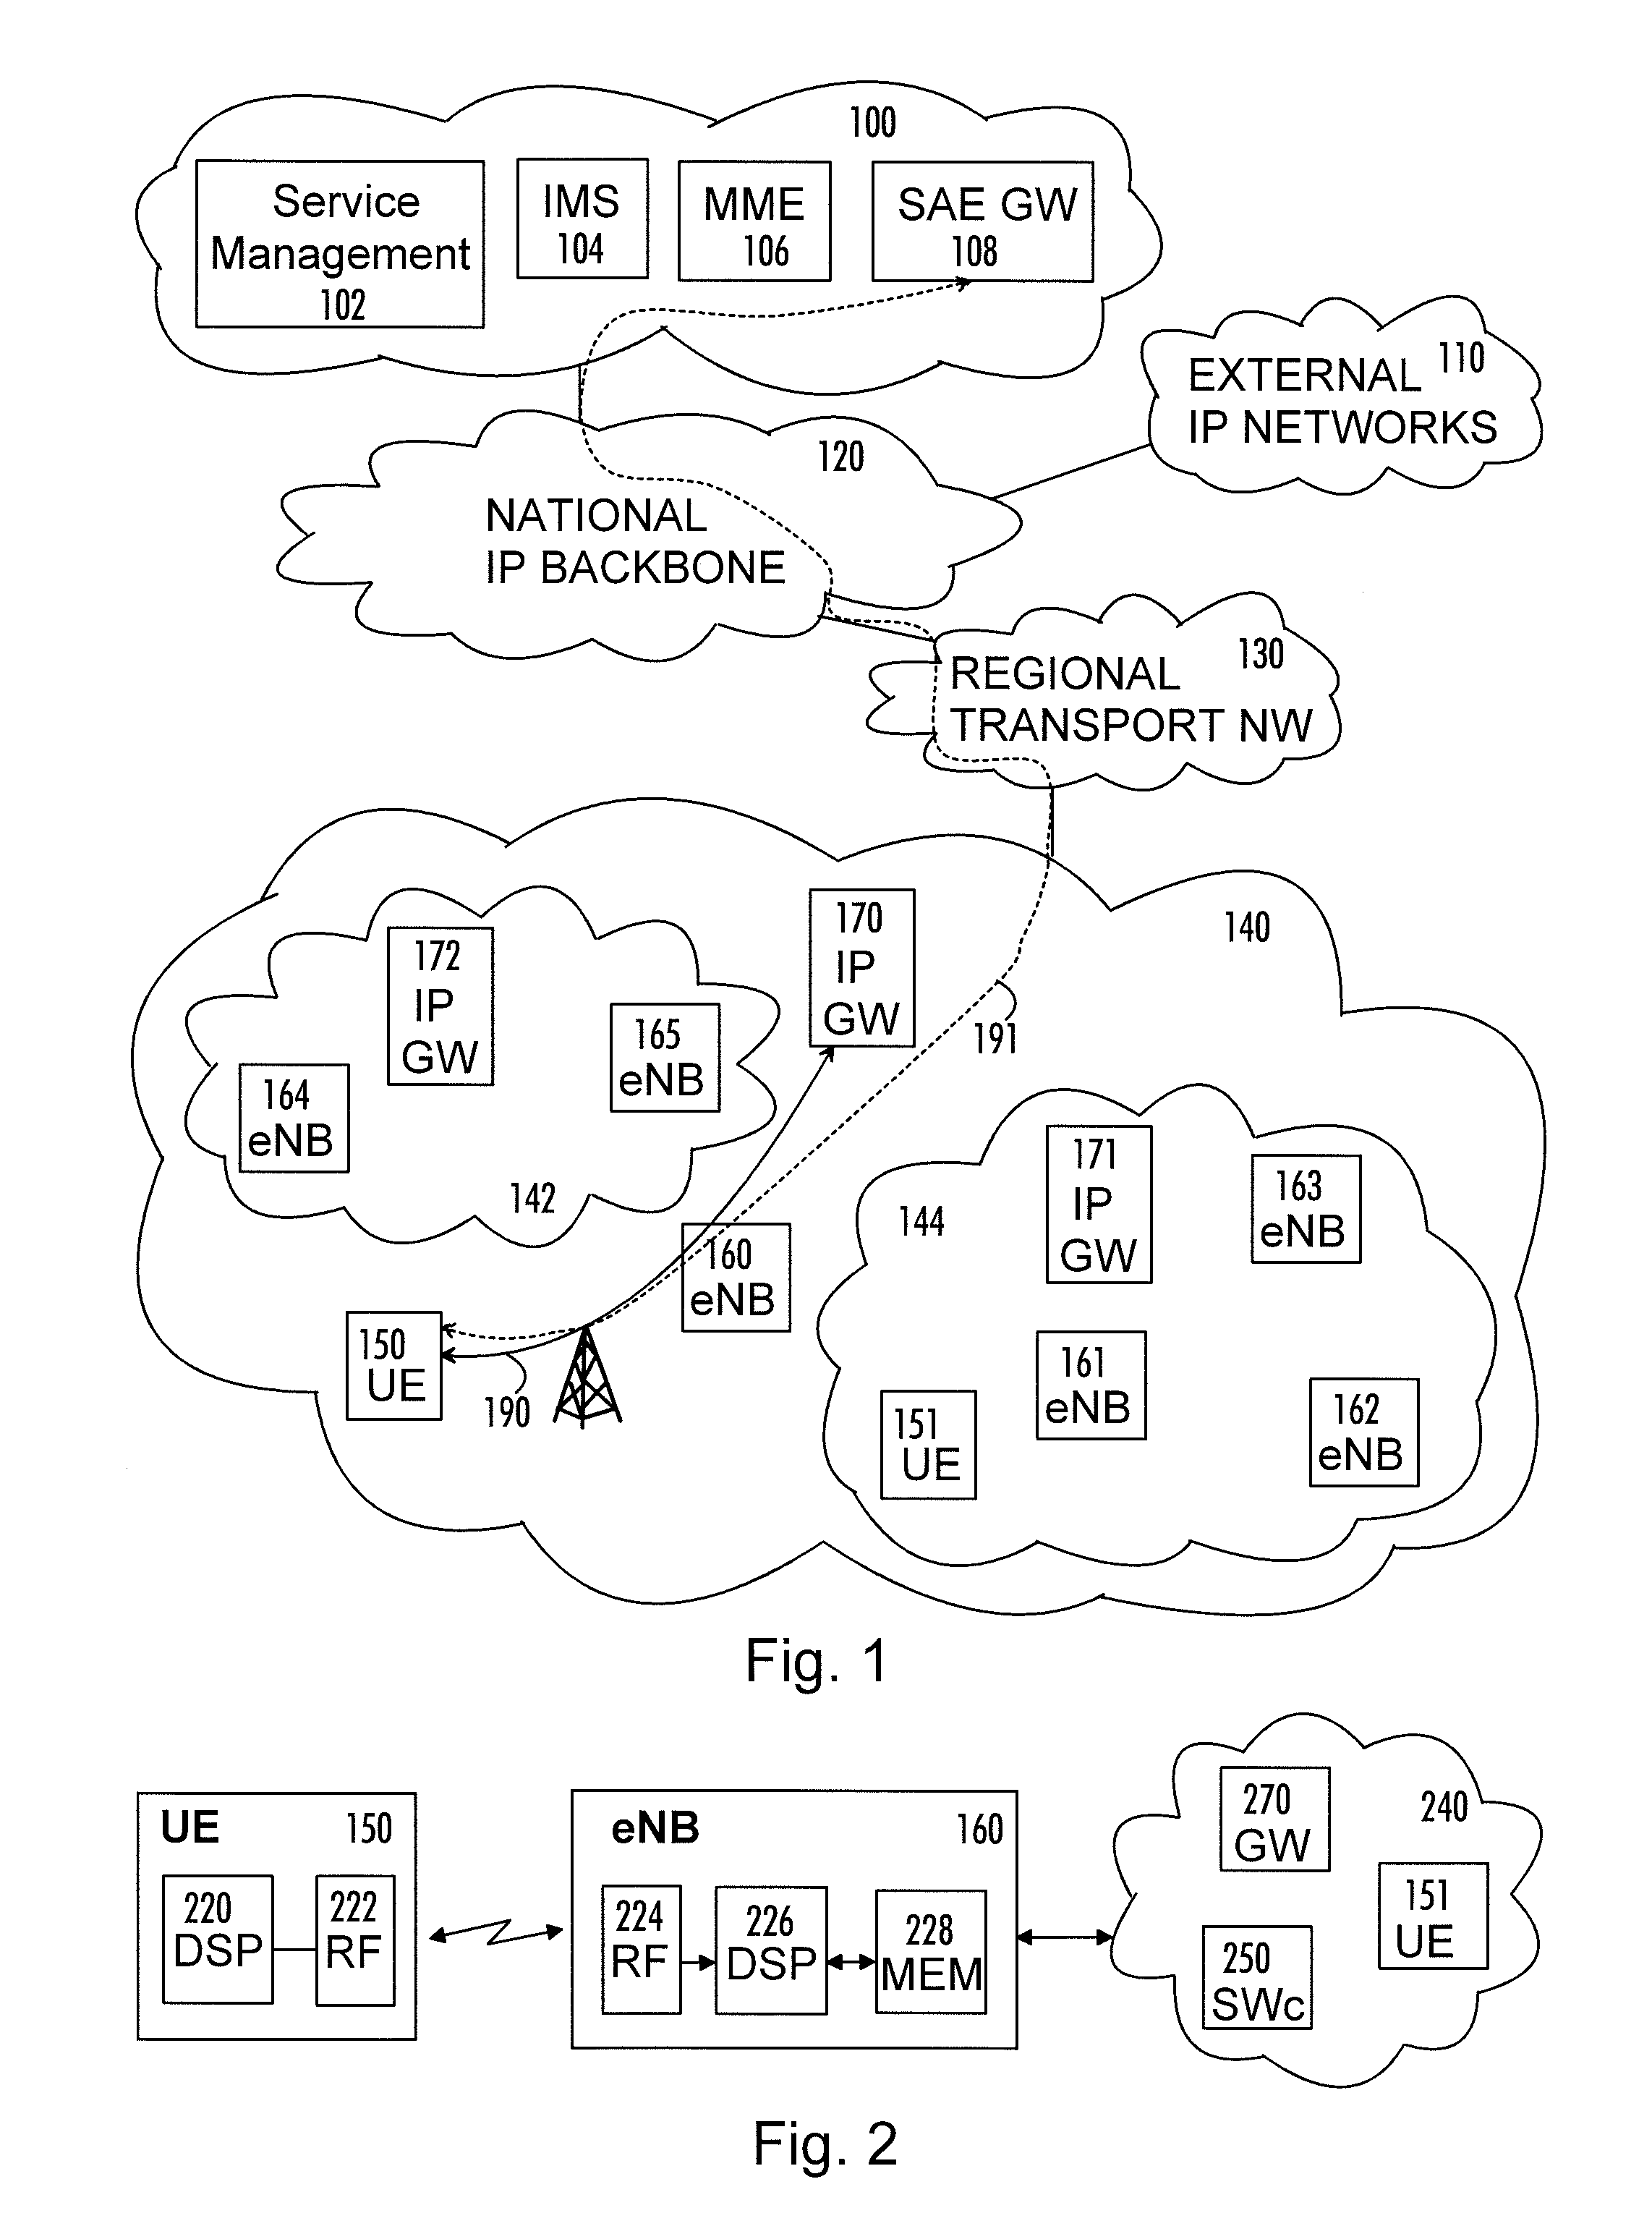 Method, radio system, mobile terminal and base station for providing local breakout service